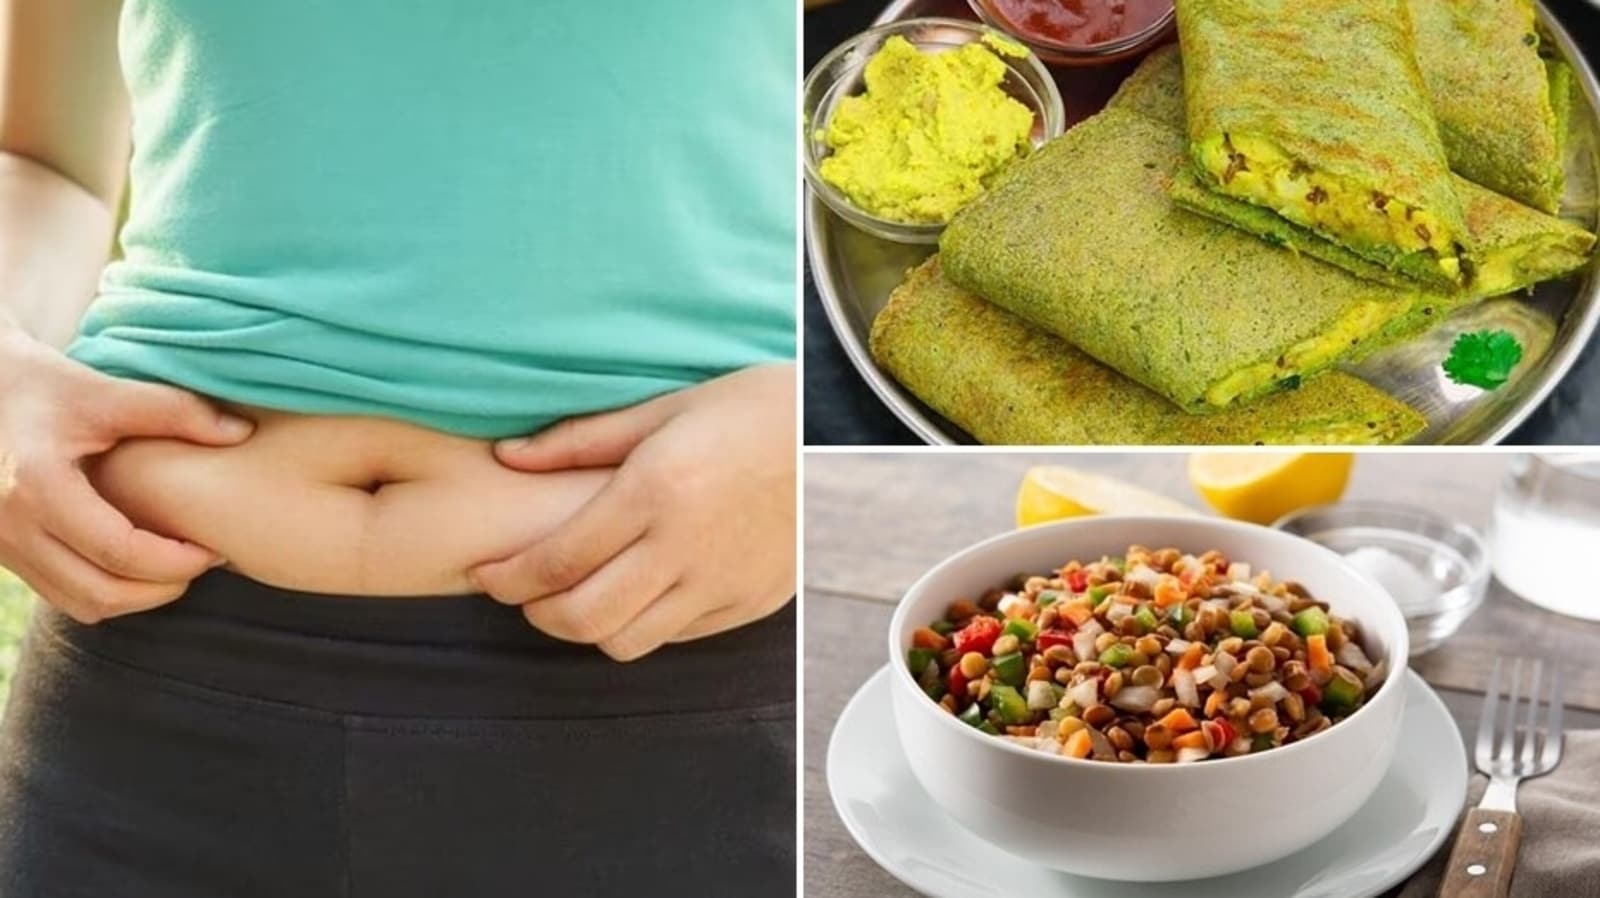 Top 10 best breakfast options to lose belly fat